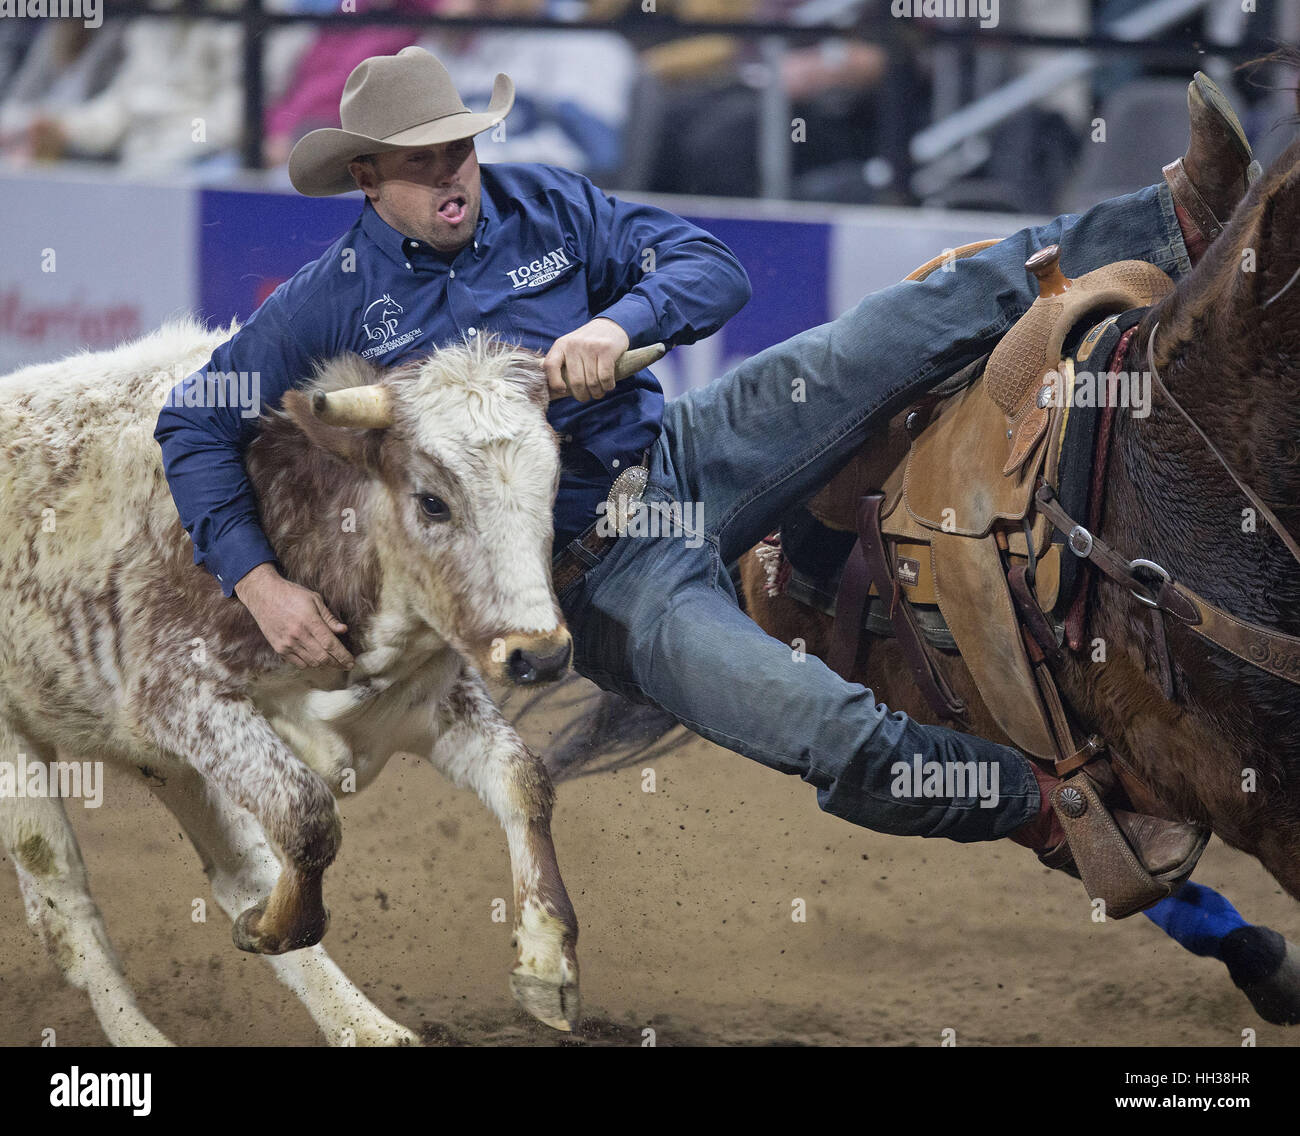 Denver, USA. 16th Jan, 2017. Steer Wrestler Olin Hannum of ID jumps on his steer during the PRCA Performance #9 at the National Western Stock Show Monday afternoon. Credit: Hector Acevedo/ZUMA Wire/Alamy Live News Stock Photo